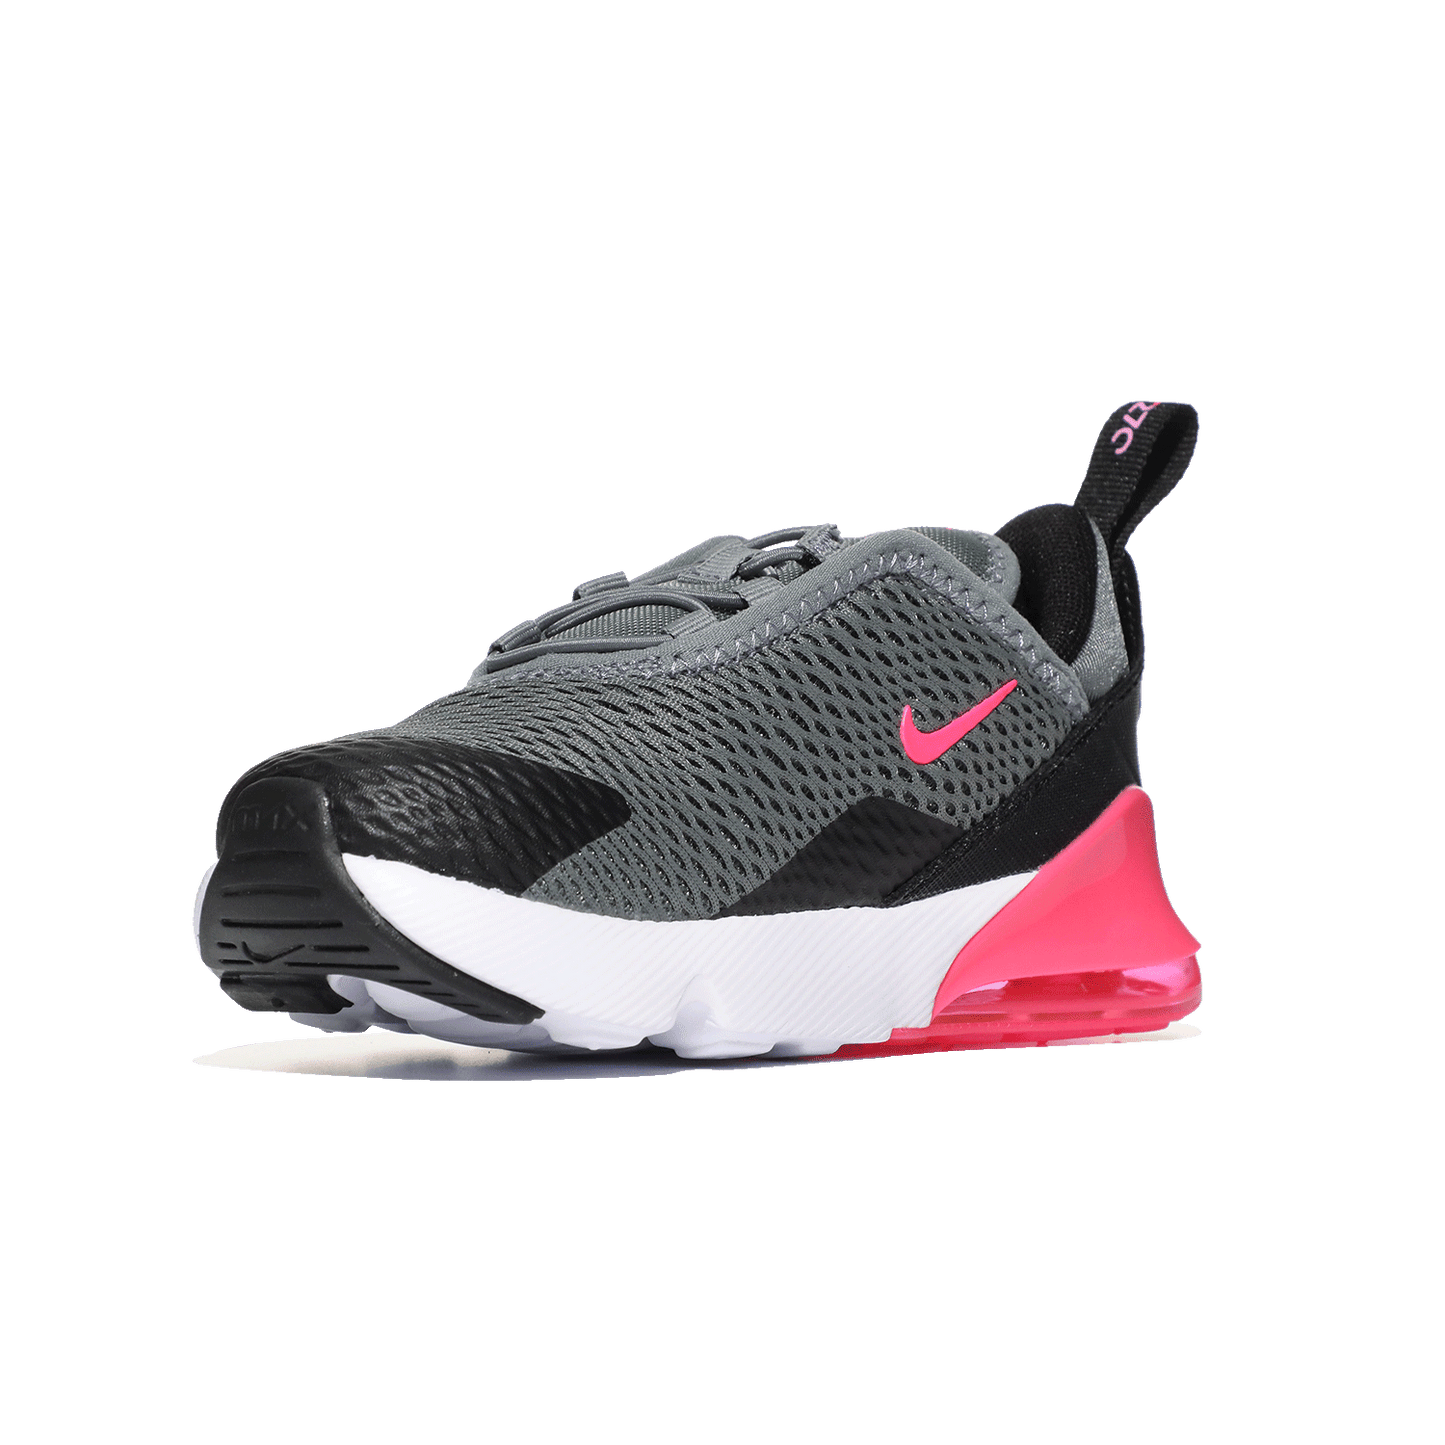 Image 5 of Air Max 270 (Infant/Toddler)